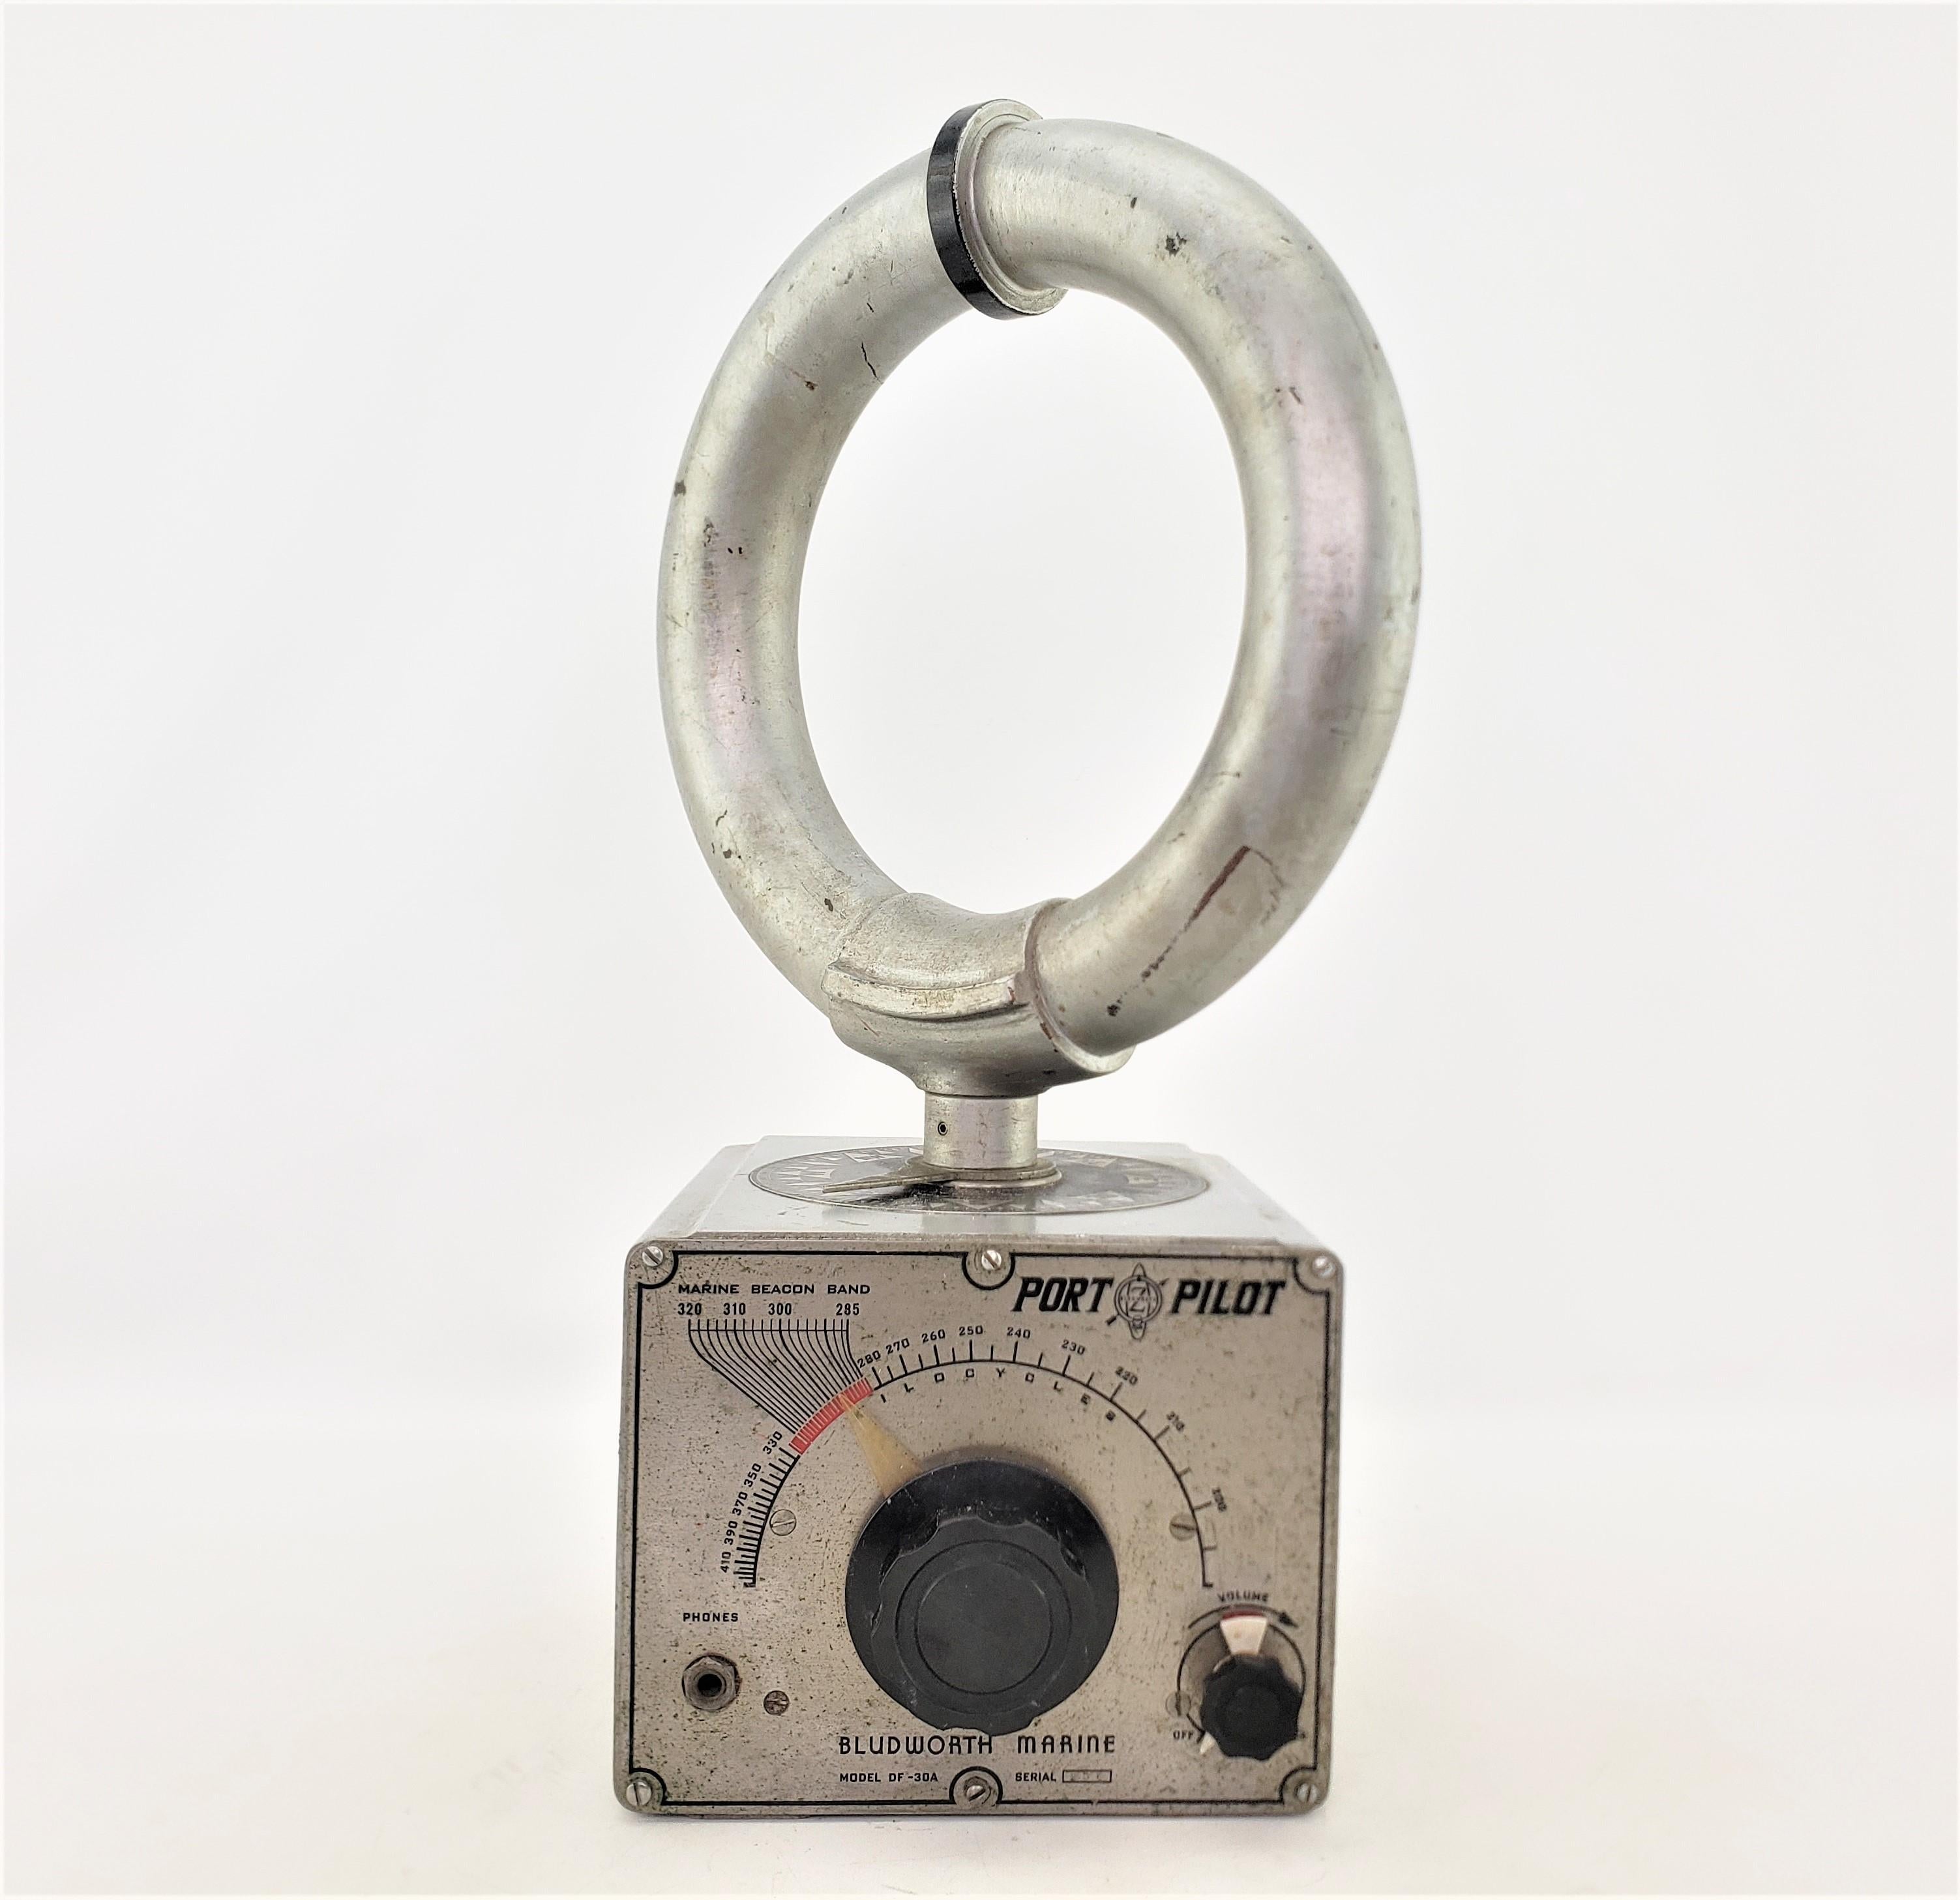 This vintage nautical direction finder was made by Bludworth Marine Mfg. of the United States in approximately 1960 in the period Mid-Century Modern style. The case is composed of metal with a period industrial grey painted finish with black silk